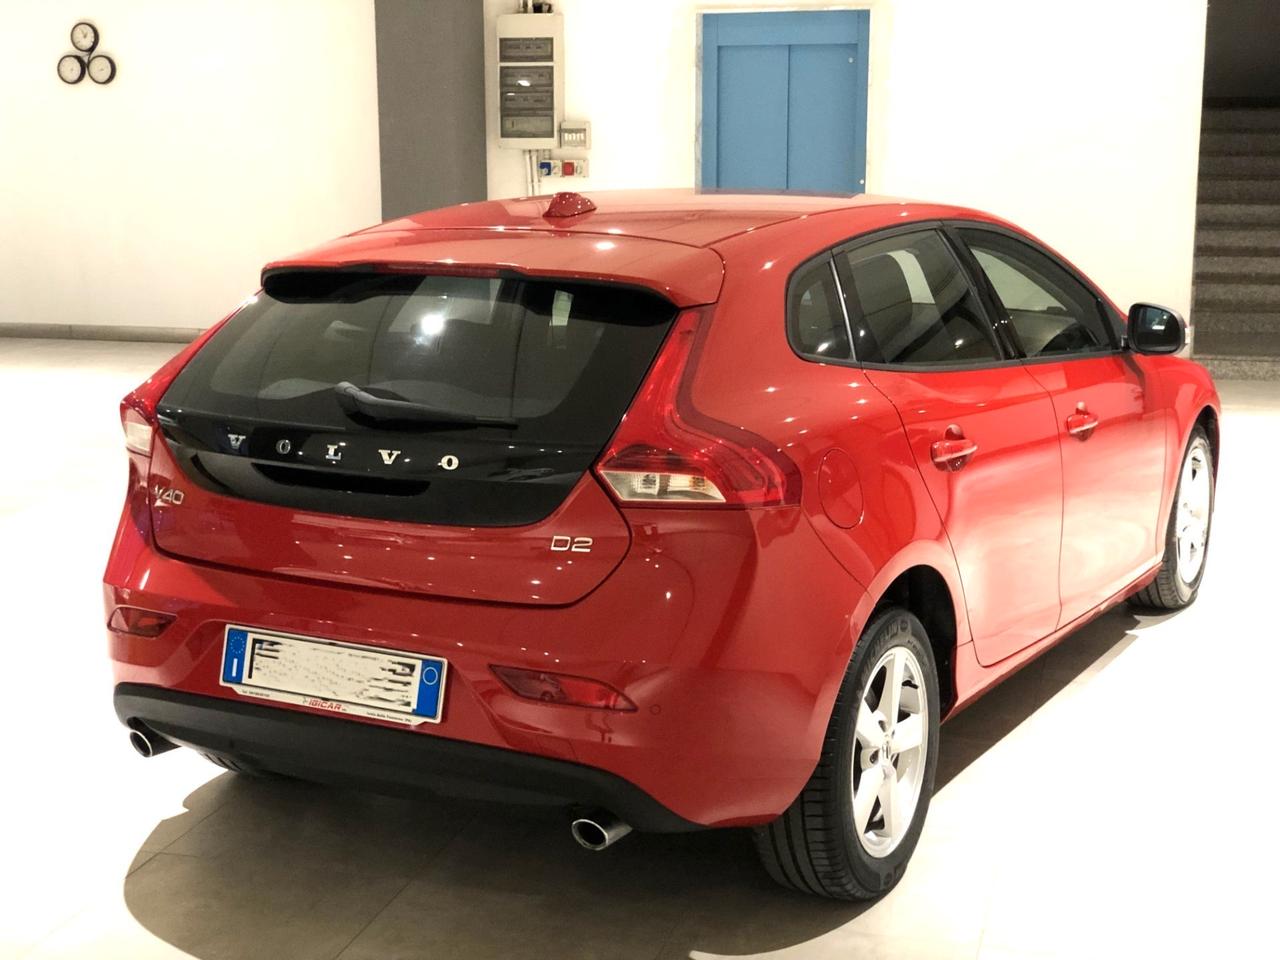 Volvo V40 D2 Geartronic Business Plus